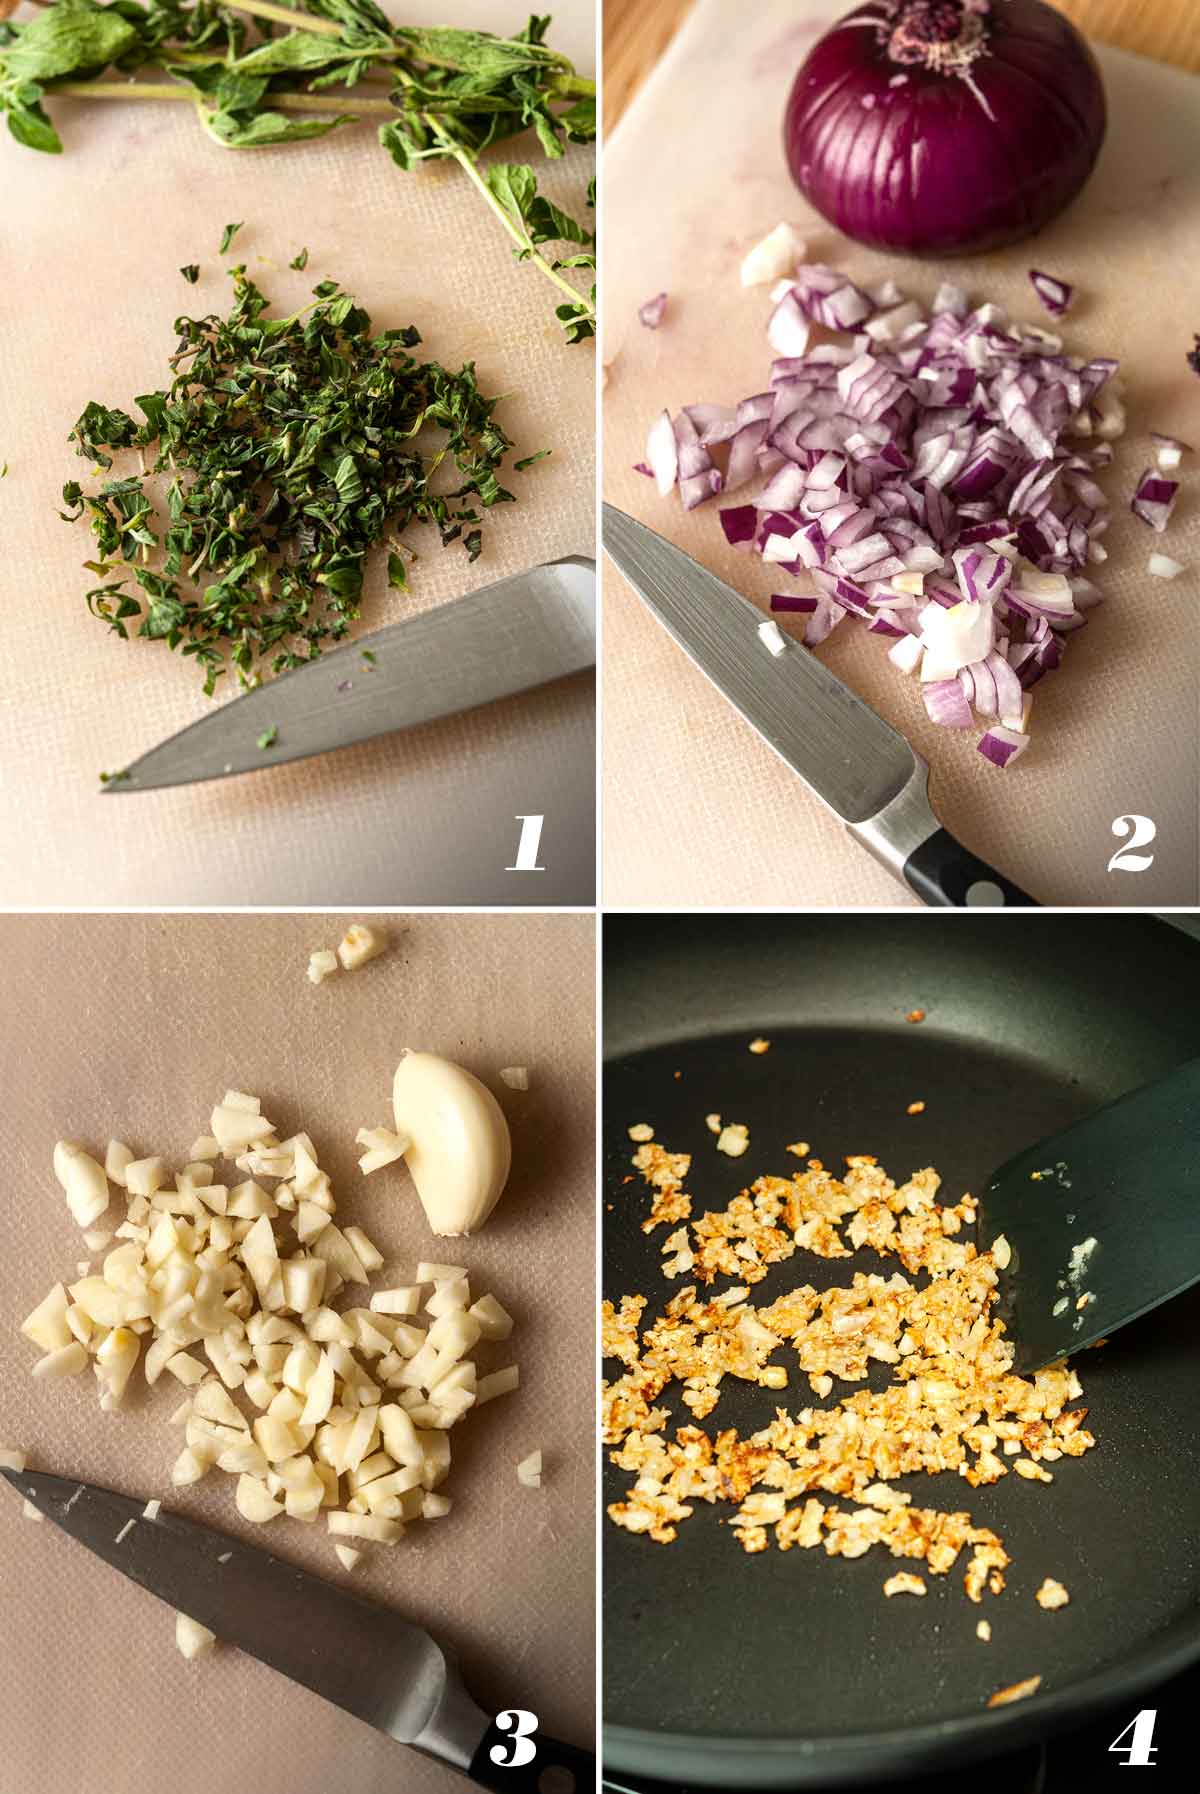 A collage of 4 images showing how to prepare ingredients for spicy lamb meatballs.